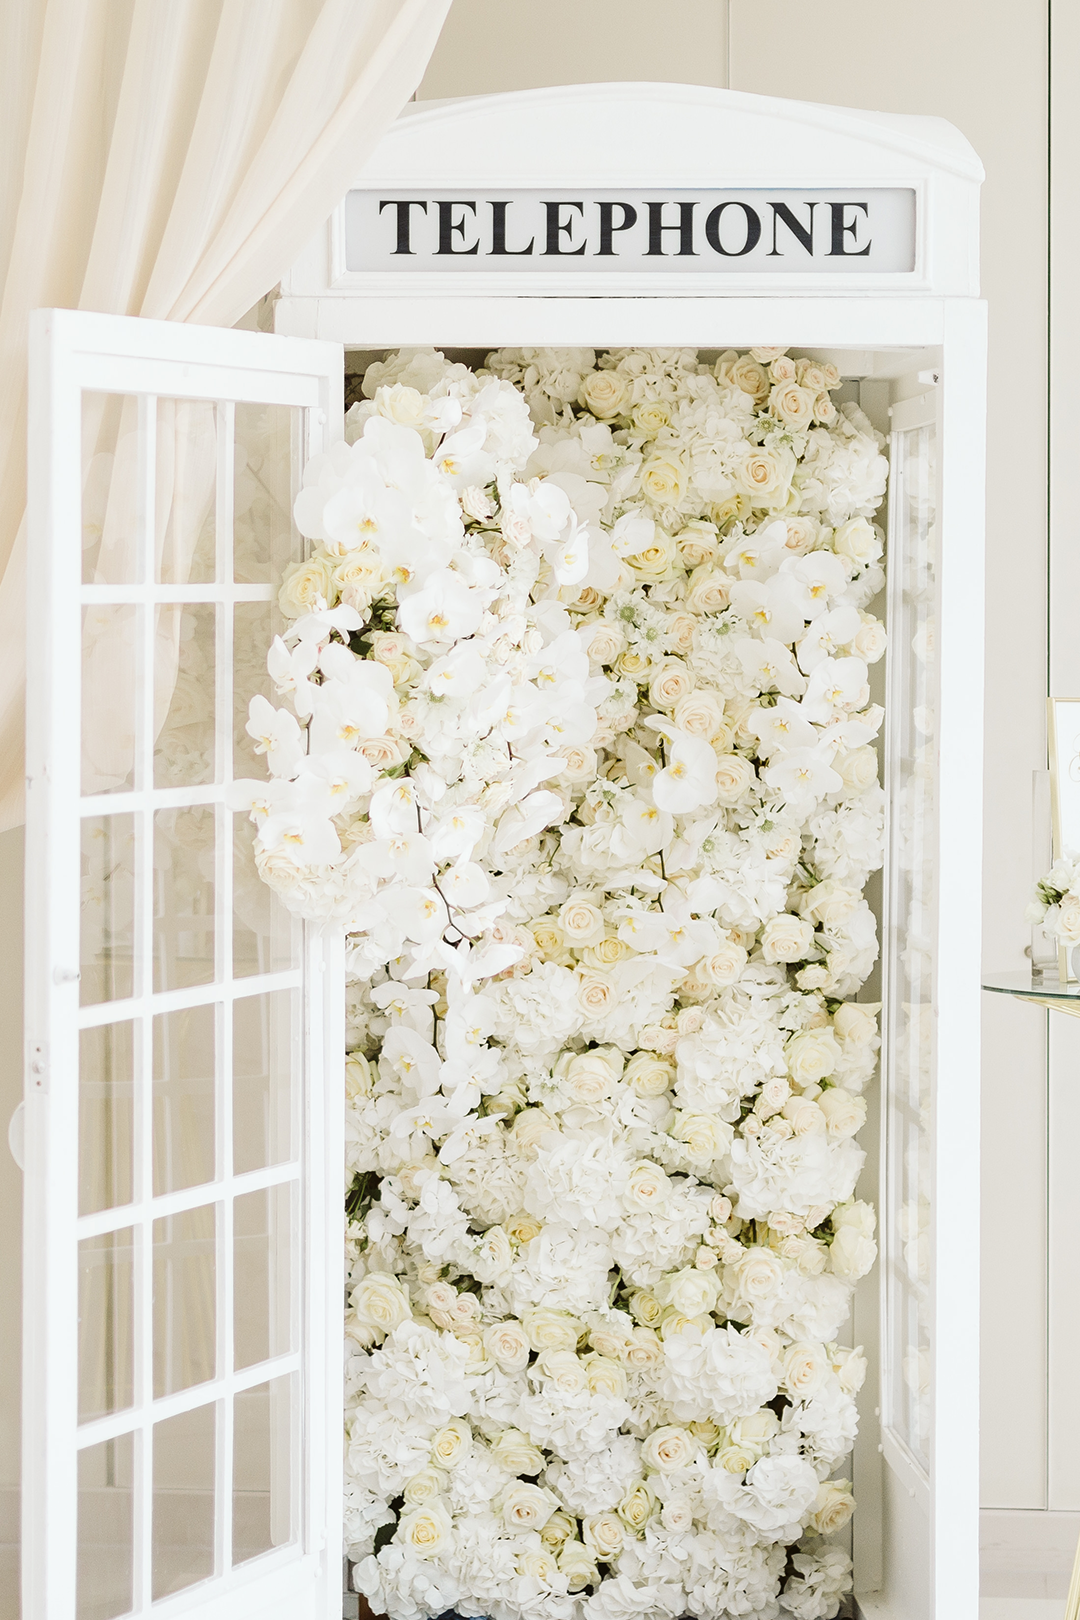 Wedding Photo Booth of a British telephone box painted white and filled with white roses and orchids, Cliveden House, UK.